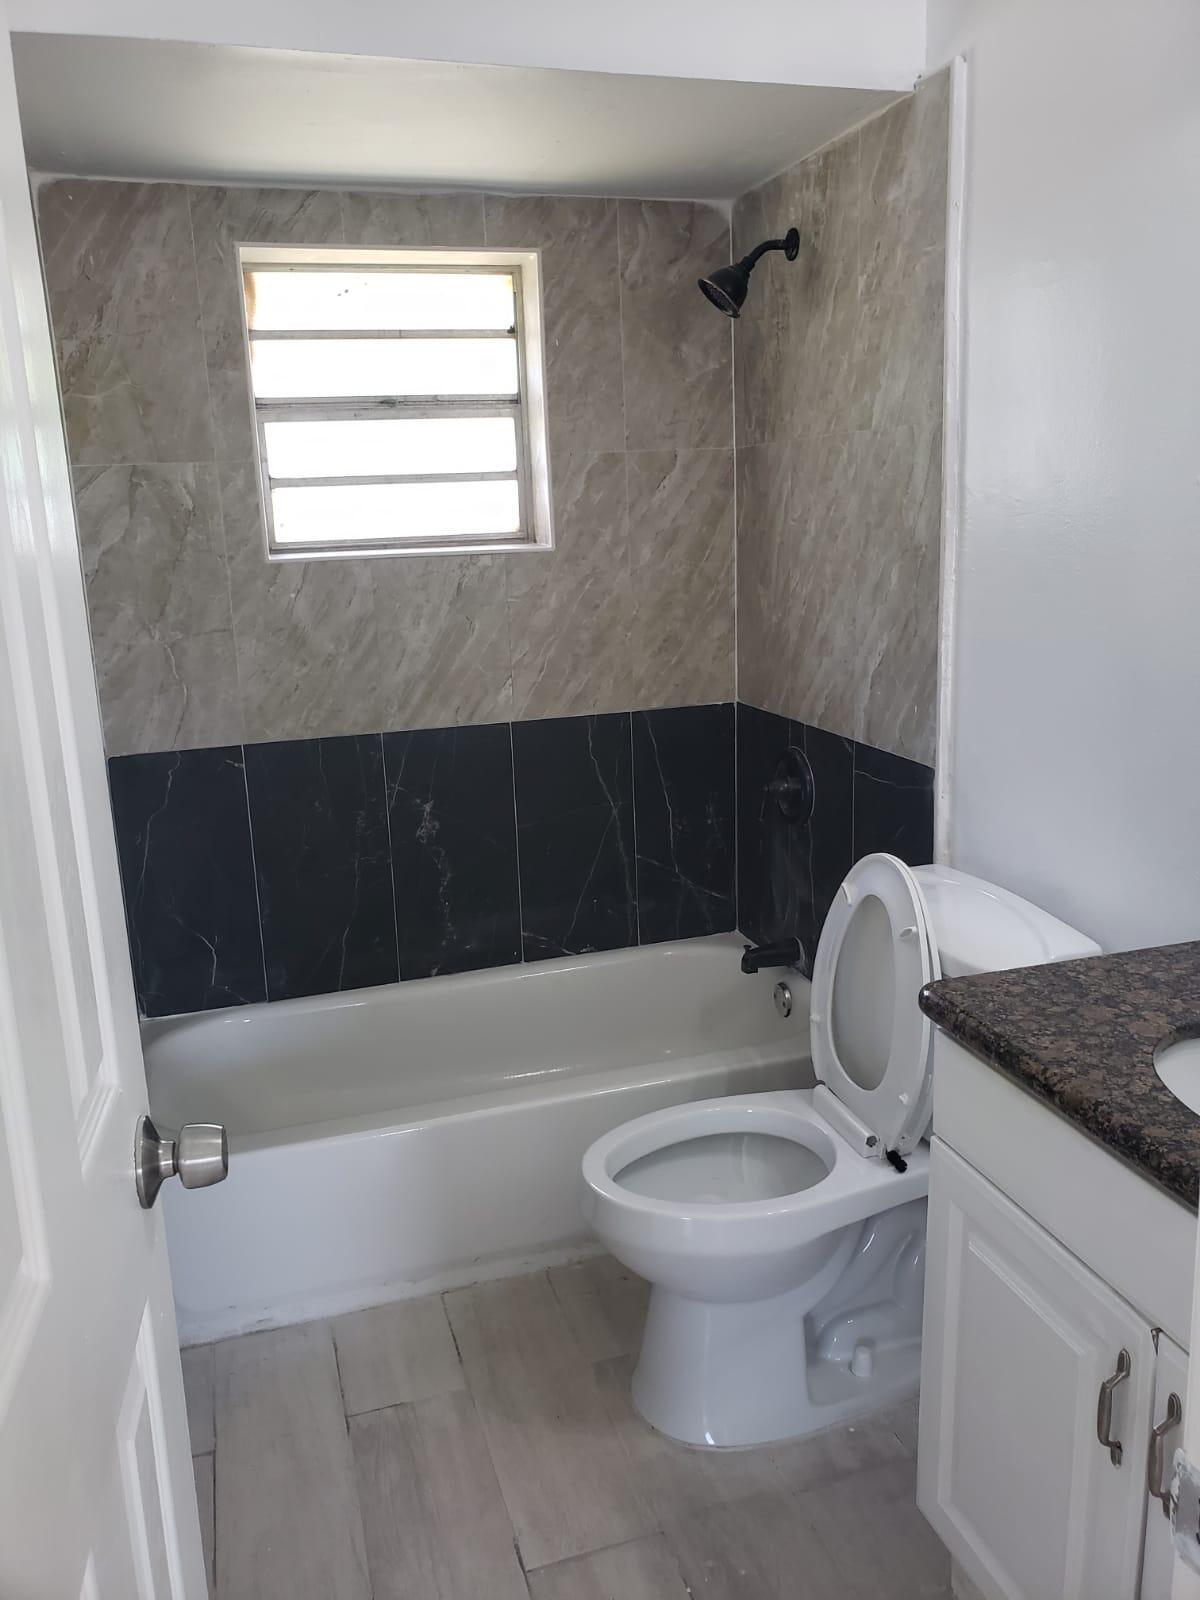 a bathroom with a granite countertop toilet a sink and bathtub